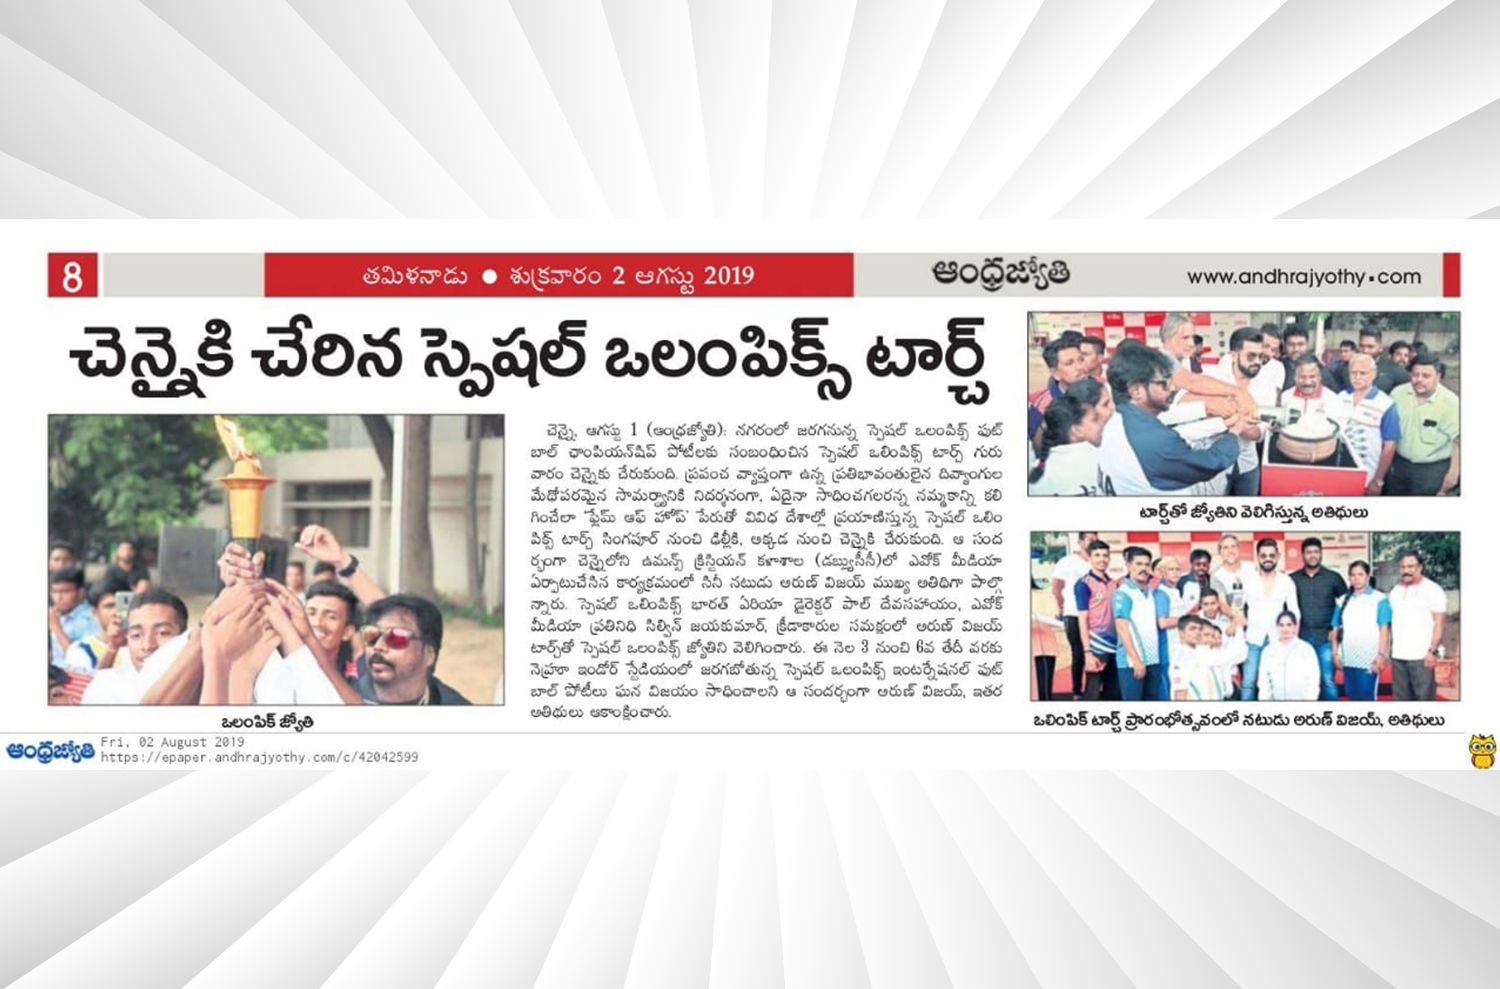 Special Olympics Andhra Jyothi